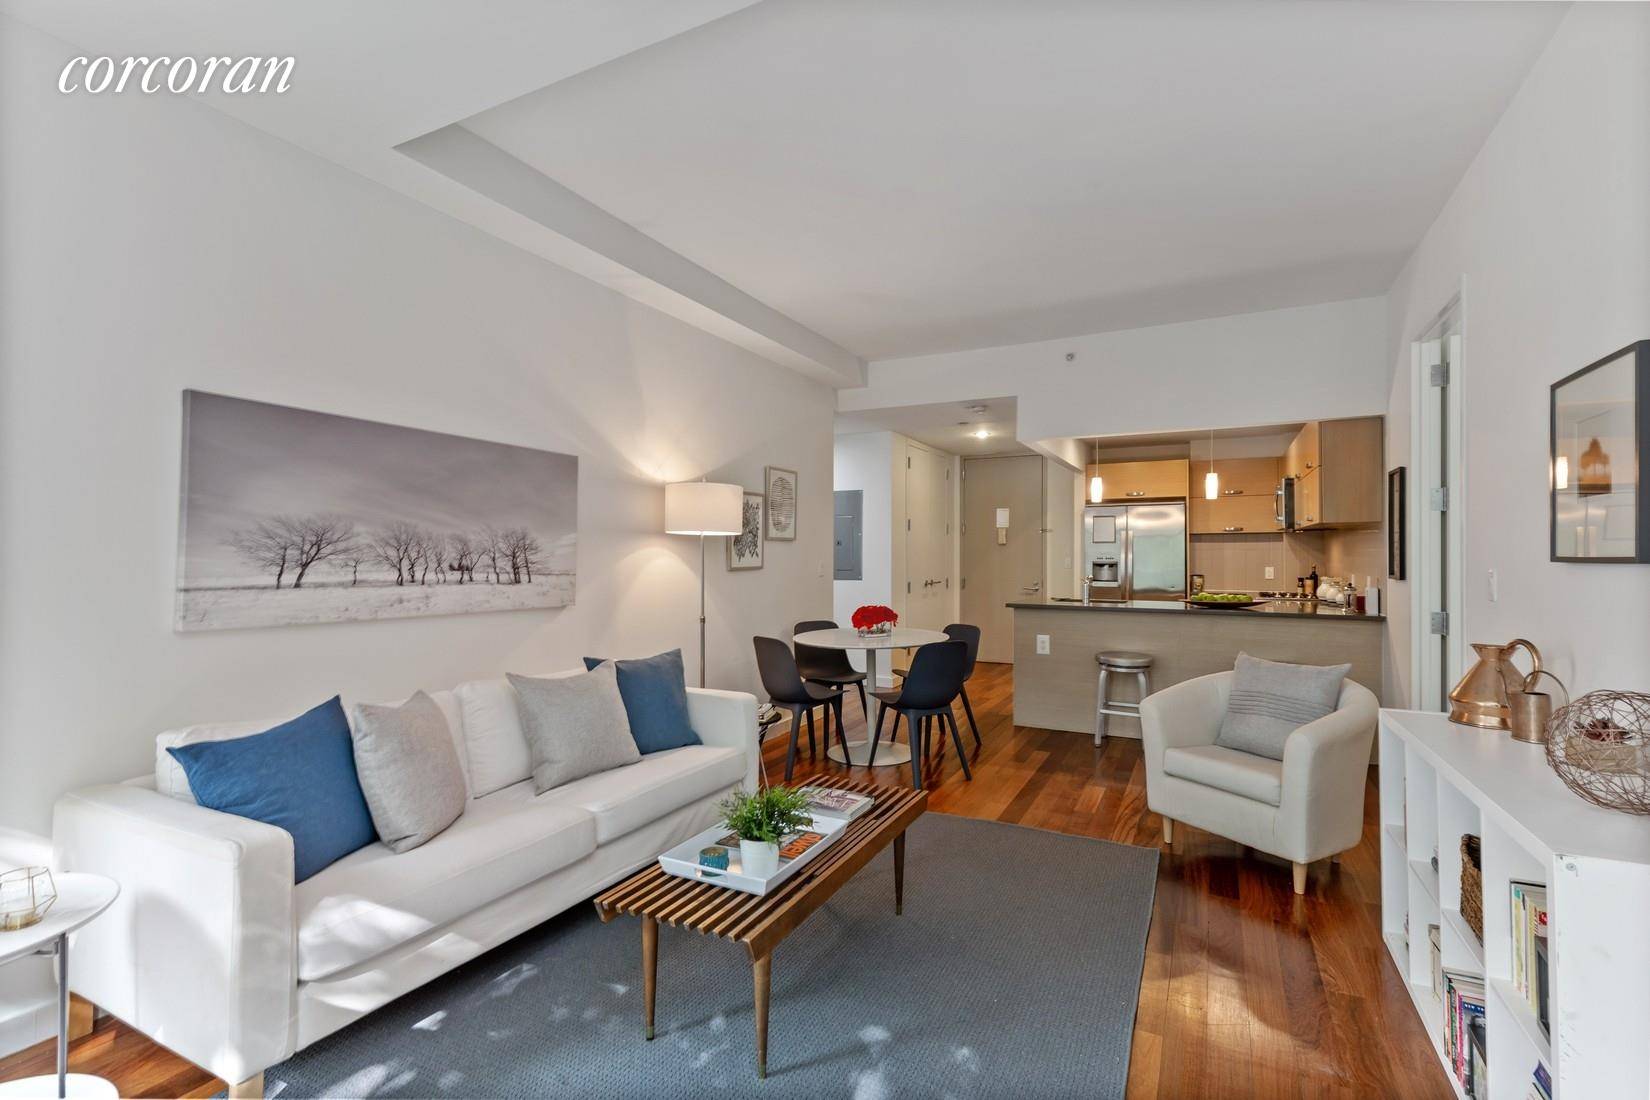 This lovely apartment is located in Clermont Greene, one of Fort Greene's most sought after full service condominium communities.